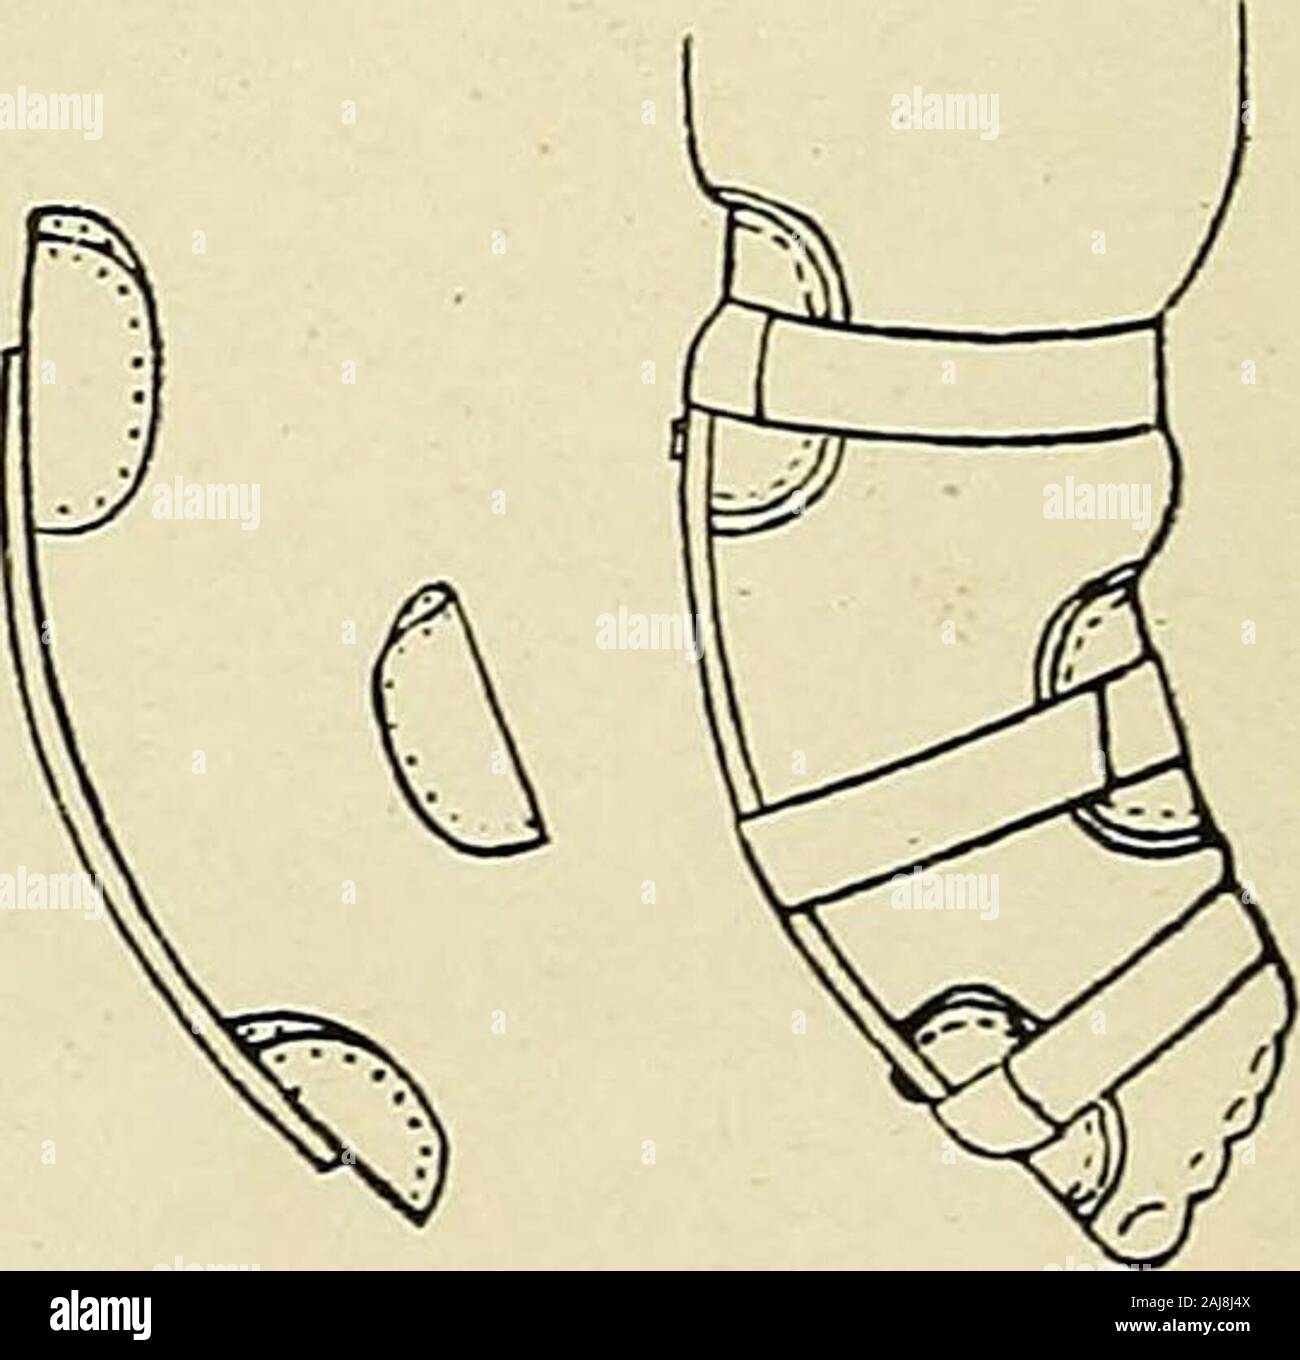 A treatise on orthopedic surgery . The .Judson club-foot splint and its application. may be described in Judsons own words: The apparatuswhich I have conveniently used to effect this reduction beforethe child learns to stand is a simple retentive brace which actsas a lever, making pressure on the outer side of the foot andankle at A, in Figs. 533 to 536, inclusive, and counterpressureat two points, one on the inner side of the leg at B, and theother at the inner Ijorder of the foot at C. It is advisable tokeep in mind that this simple instrument is a lever, because ifwe know that we are using Stock Photo